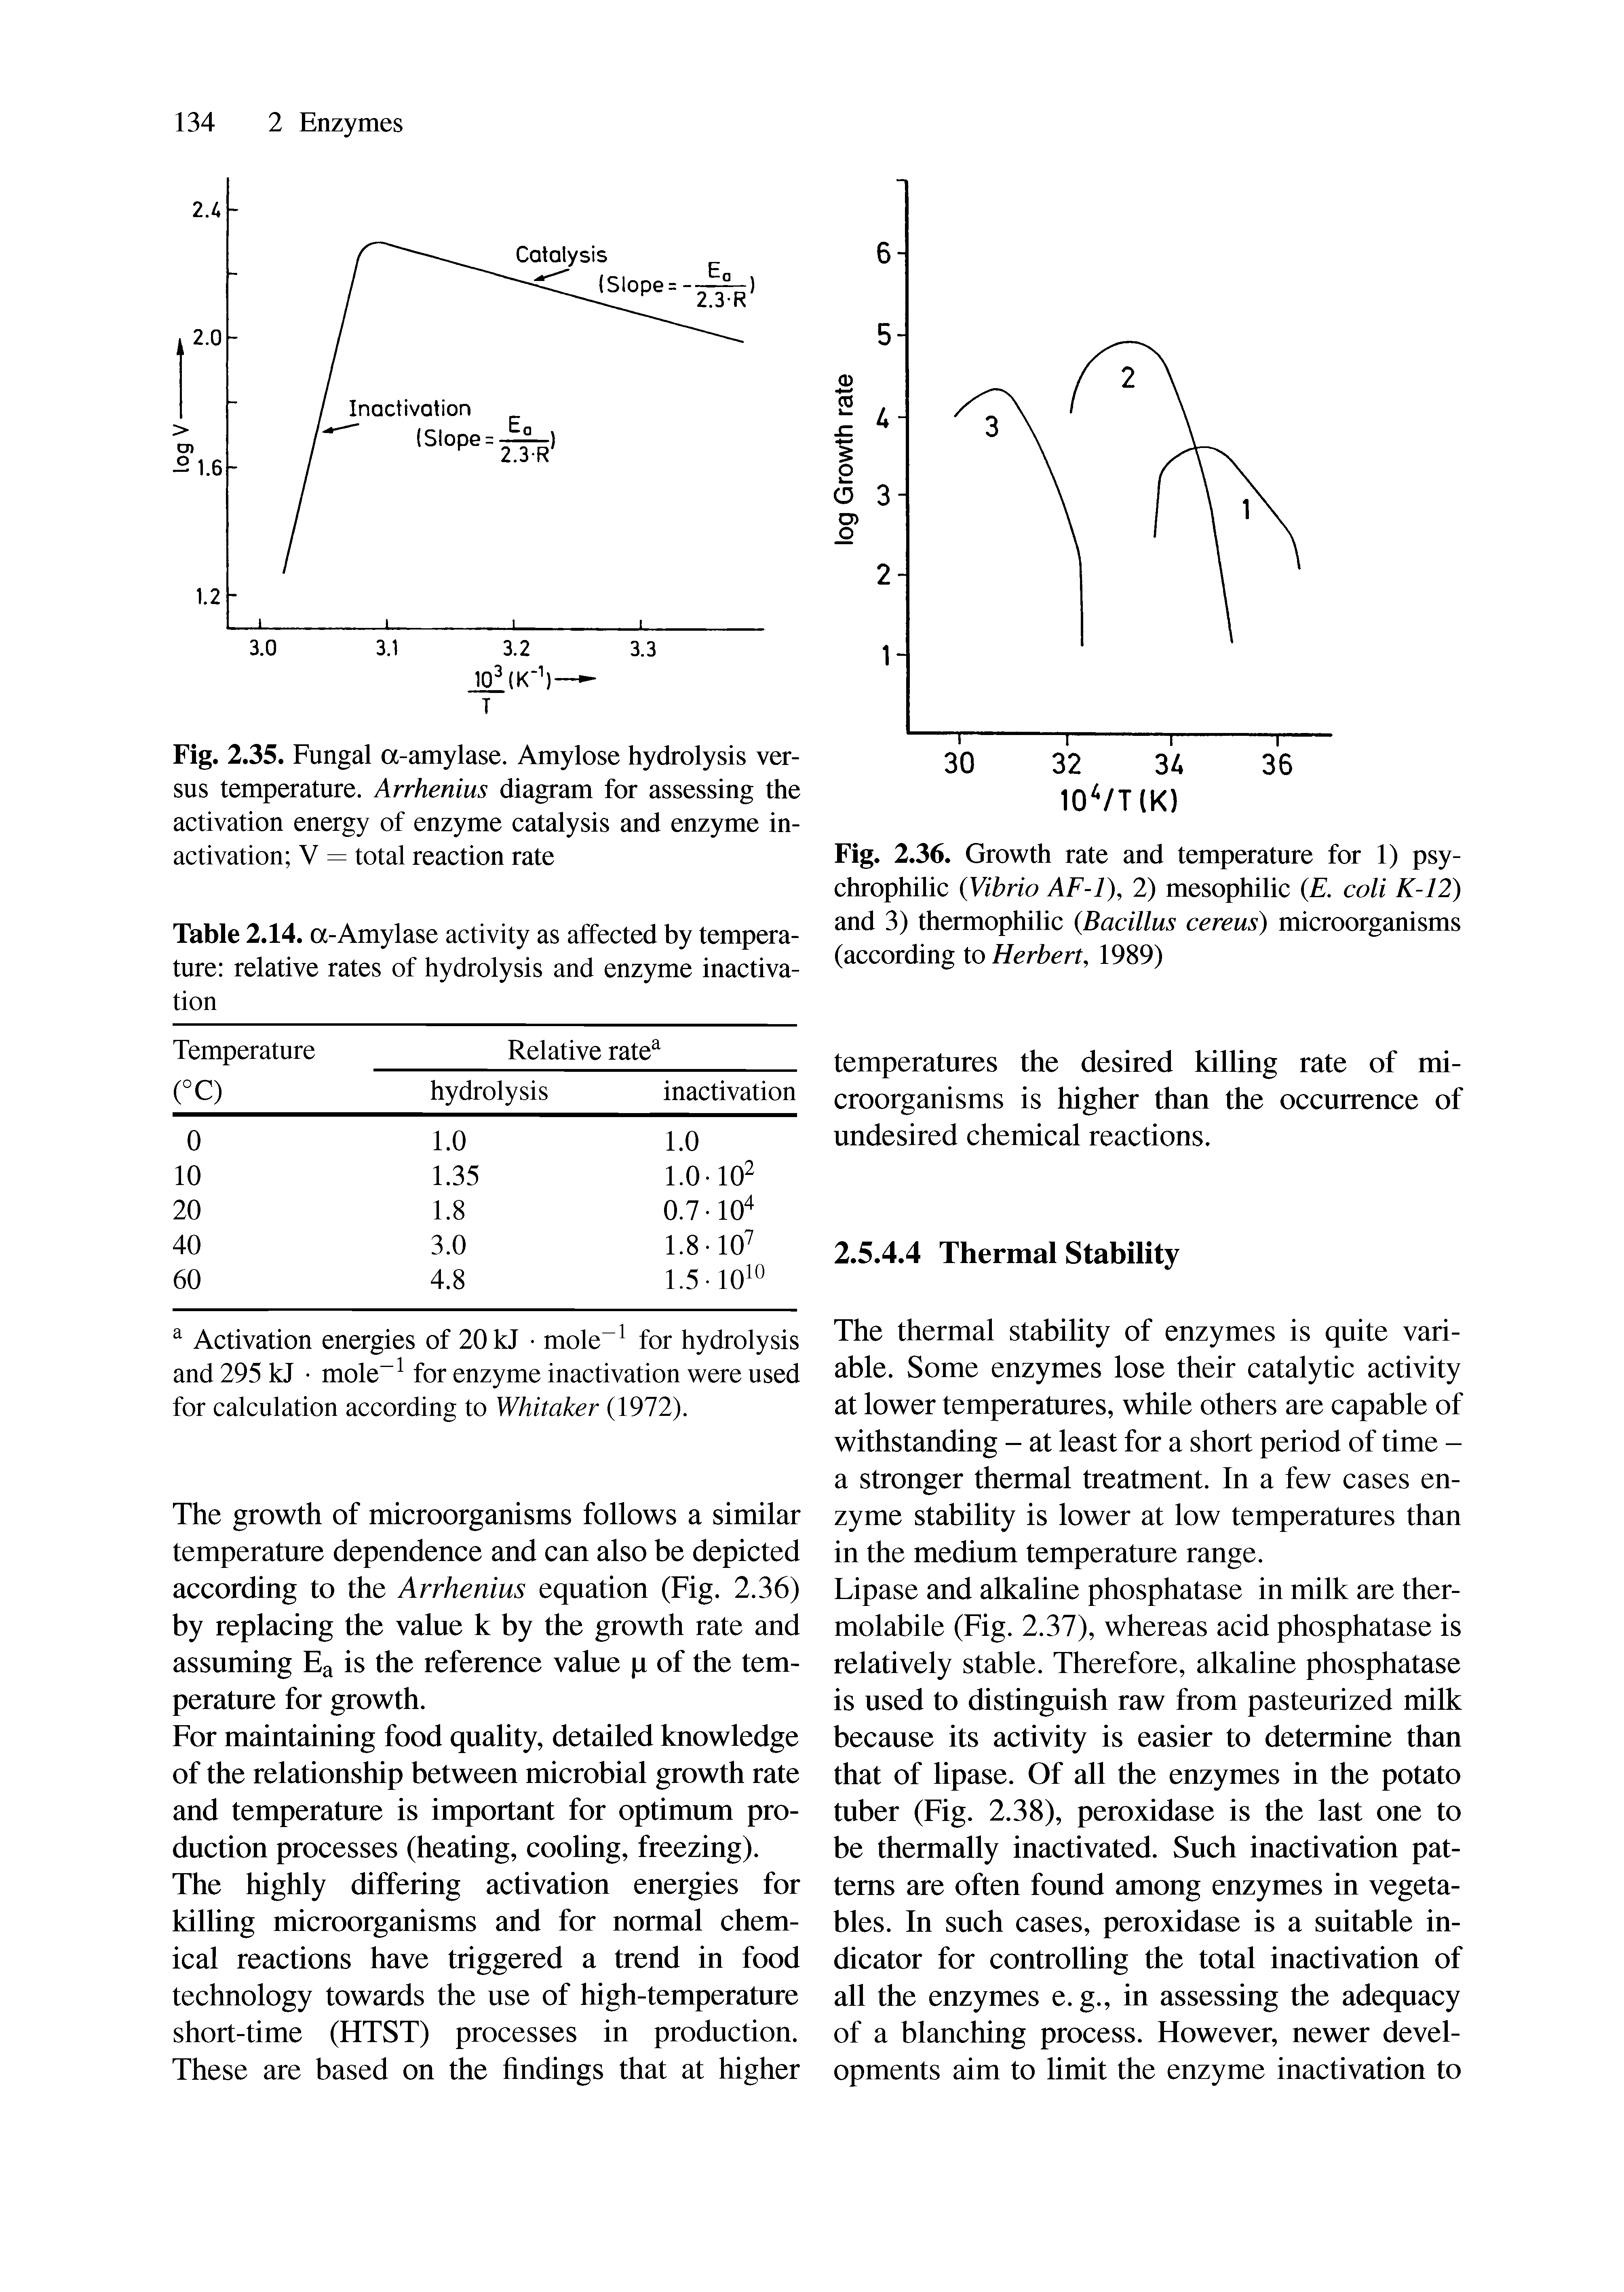 Fig. 2.36. Growth rate and temperature for 1) psy-chrophilic (Vibrio AF-1 2) mesophilic (E. coli K-12) and 3) thermophilic (Bacillus cereus) microorganisms (according to Herbert, 1989)...